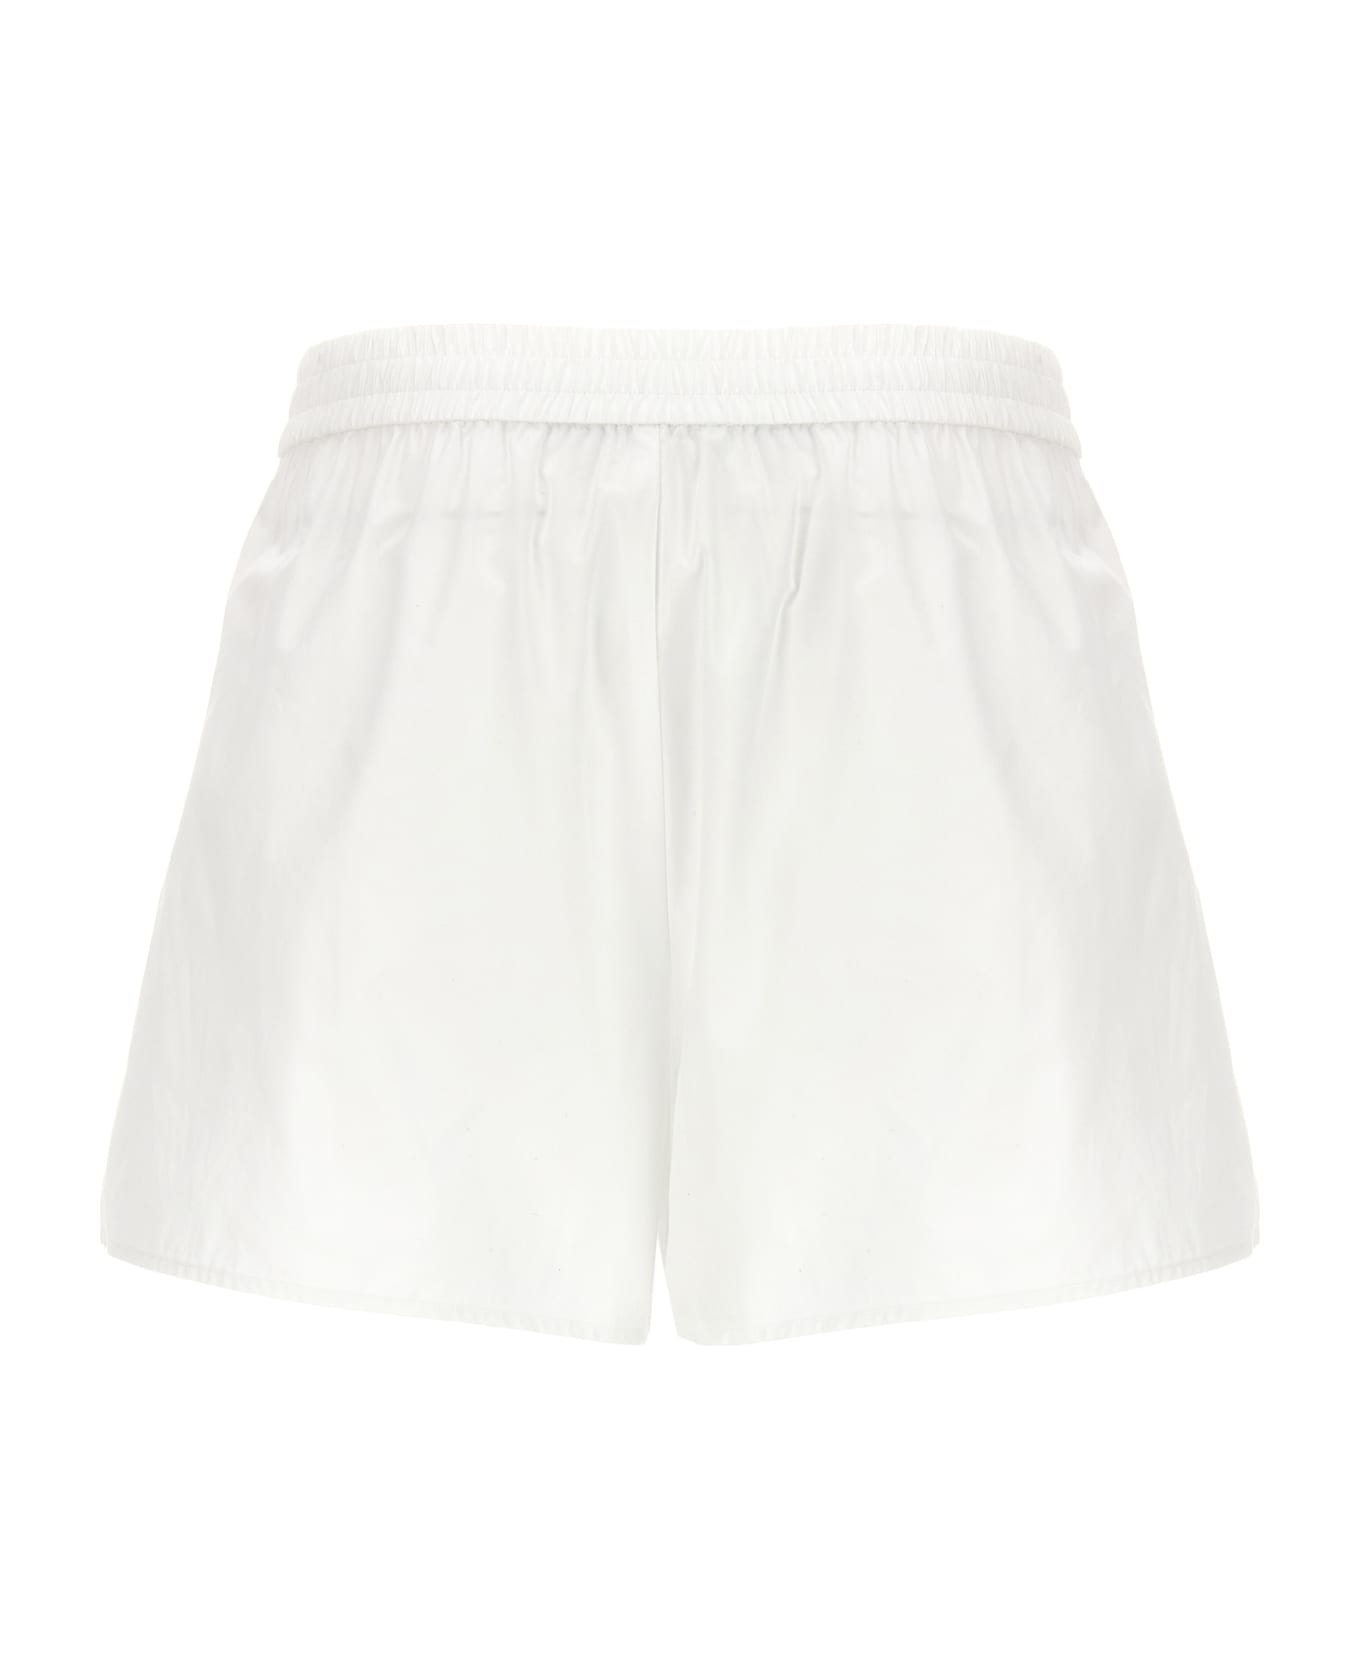 T by Alexander Wang 'classic Boxer' Shorts - White